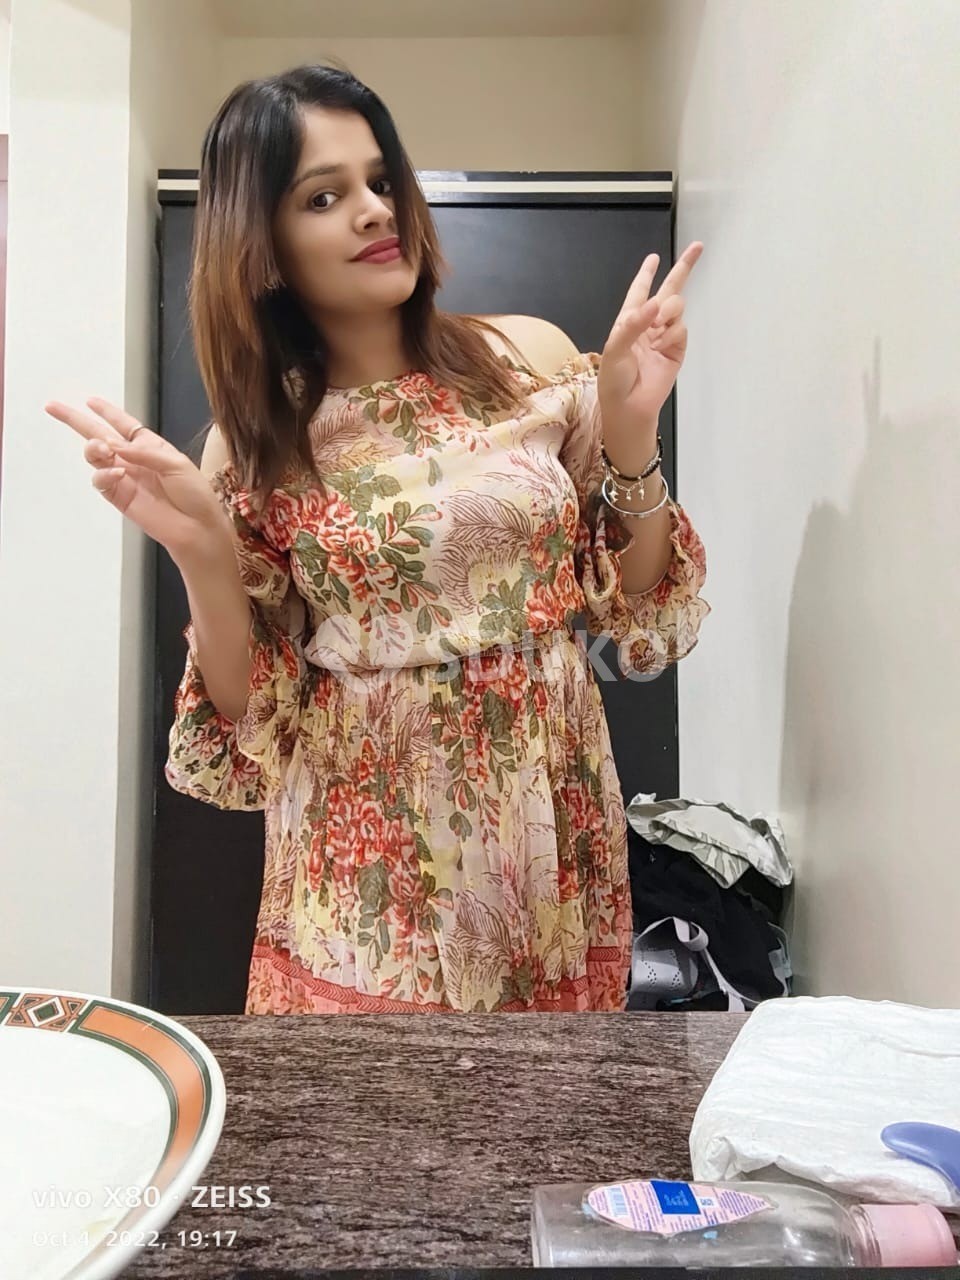 Agartala 1500 unlimited shot low price high profile girls available safe and location